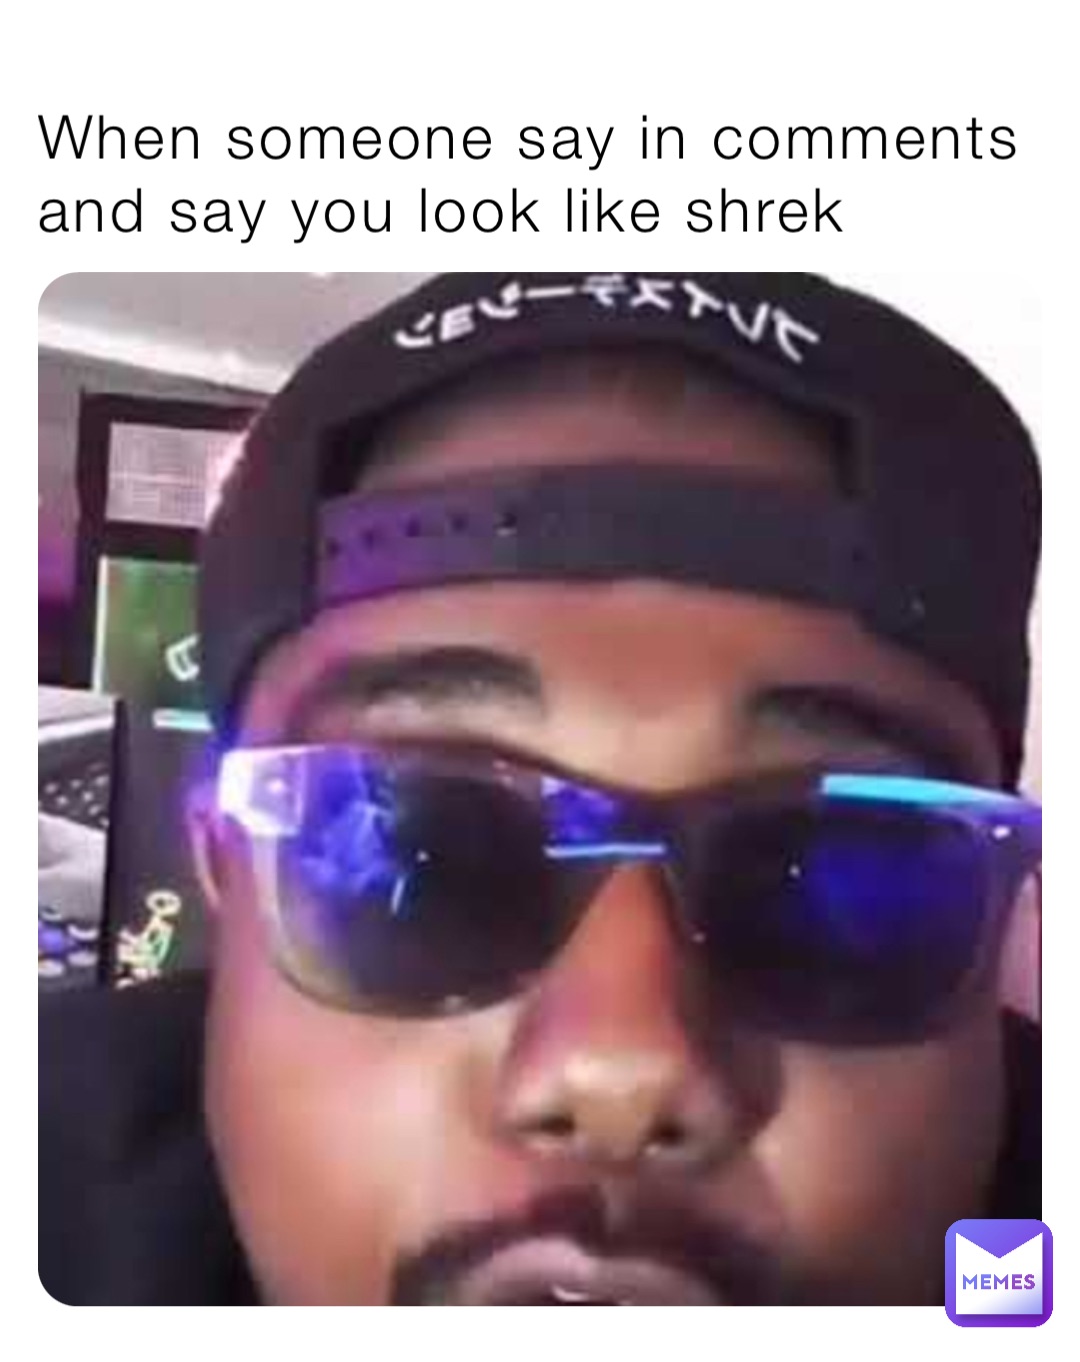 When someone say in comments and say you look like shrek